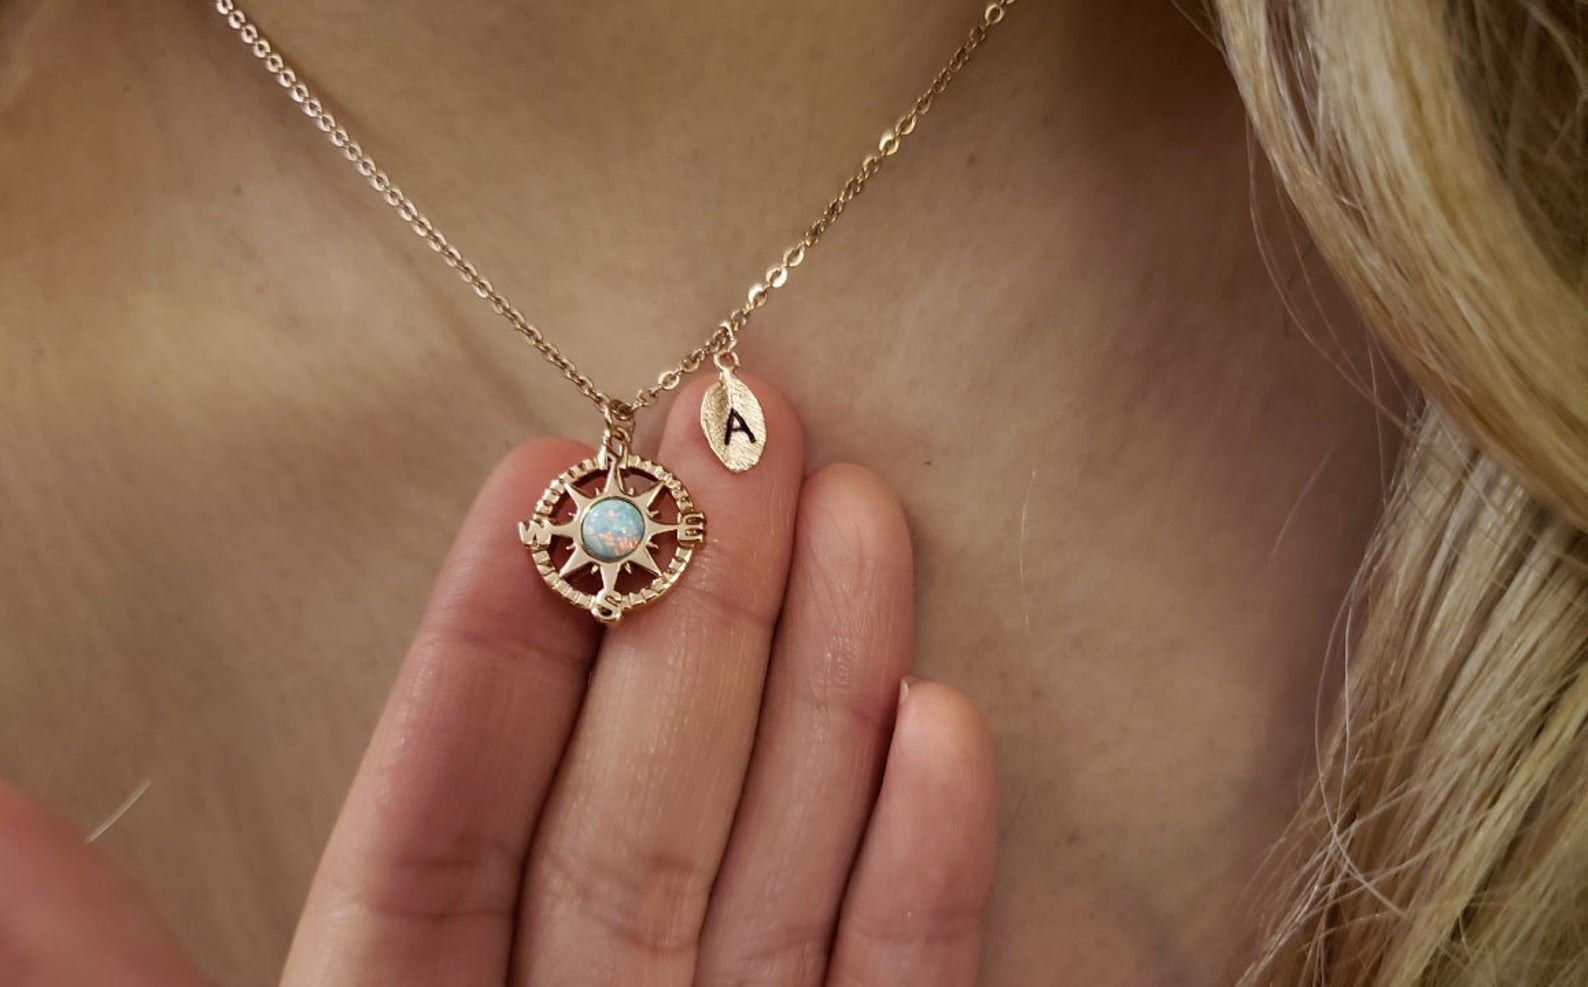 Model is wearing a necklace with a gold compass and leaf that has the letter A engraved